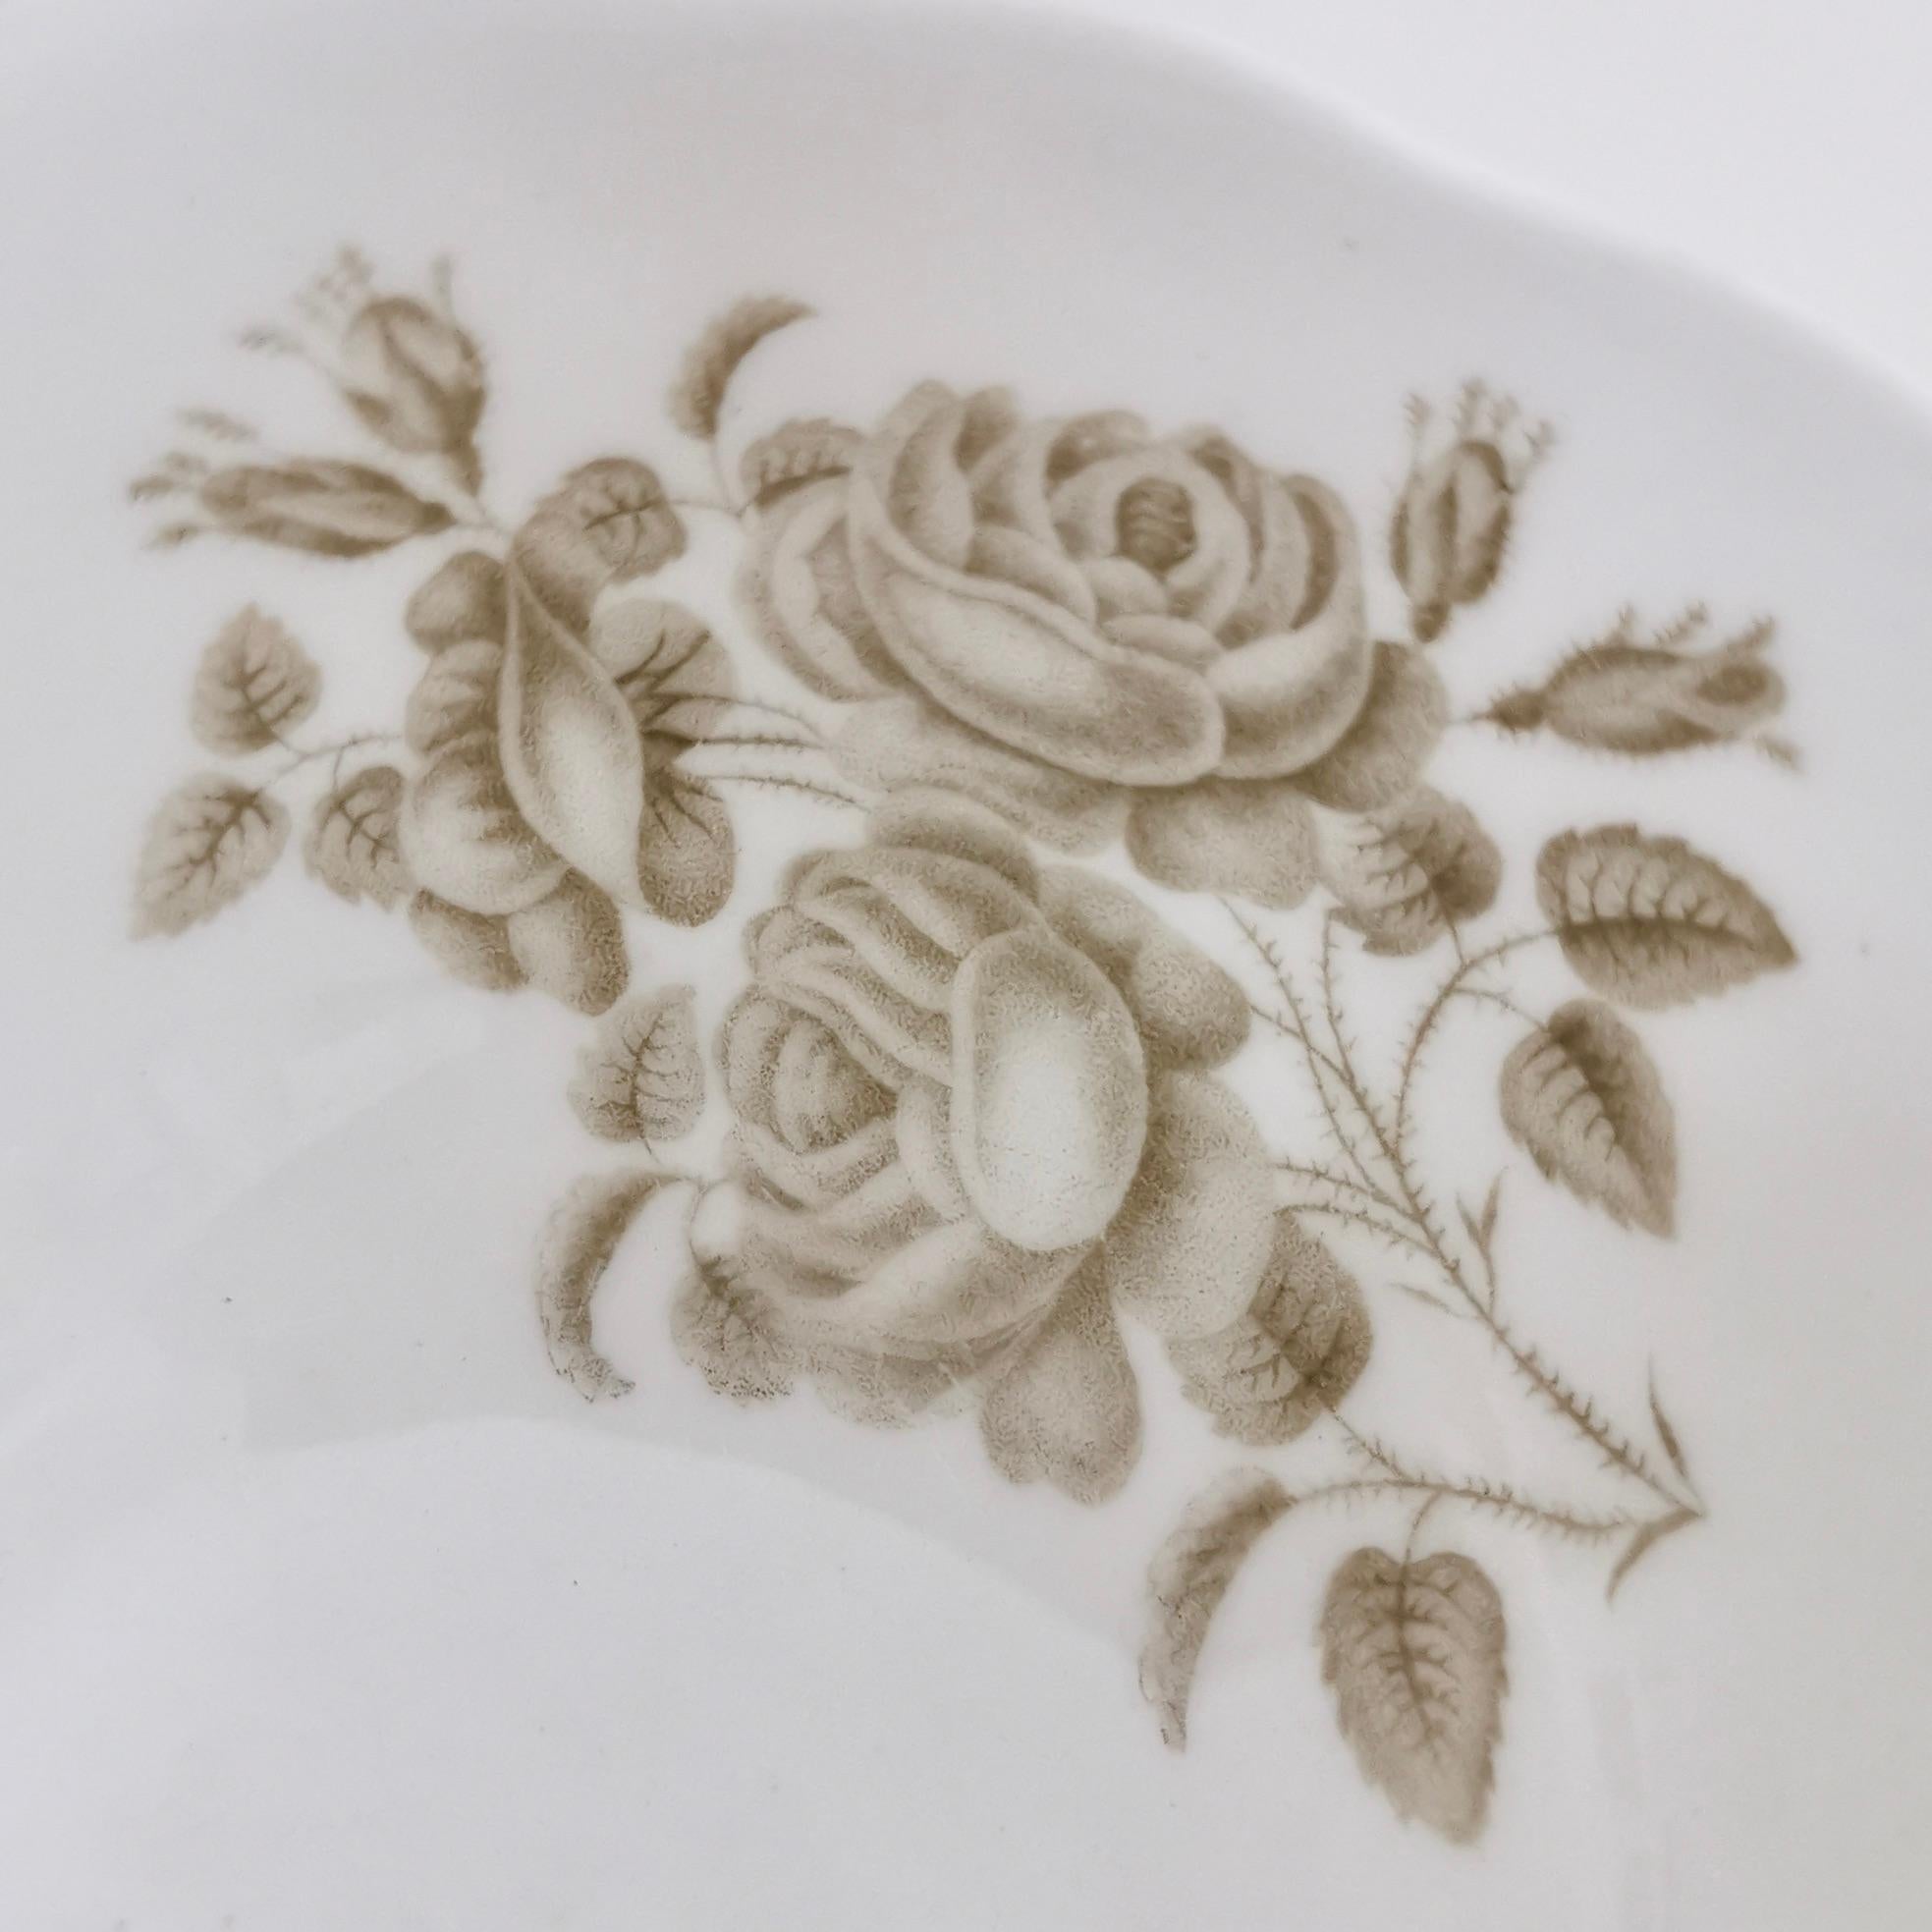 Minton Porcelain Teacup Trio, Bath Embossed White with Sepia Roses, Regency 1830 For Sale 4